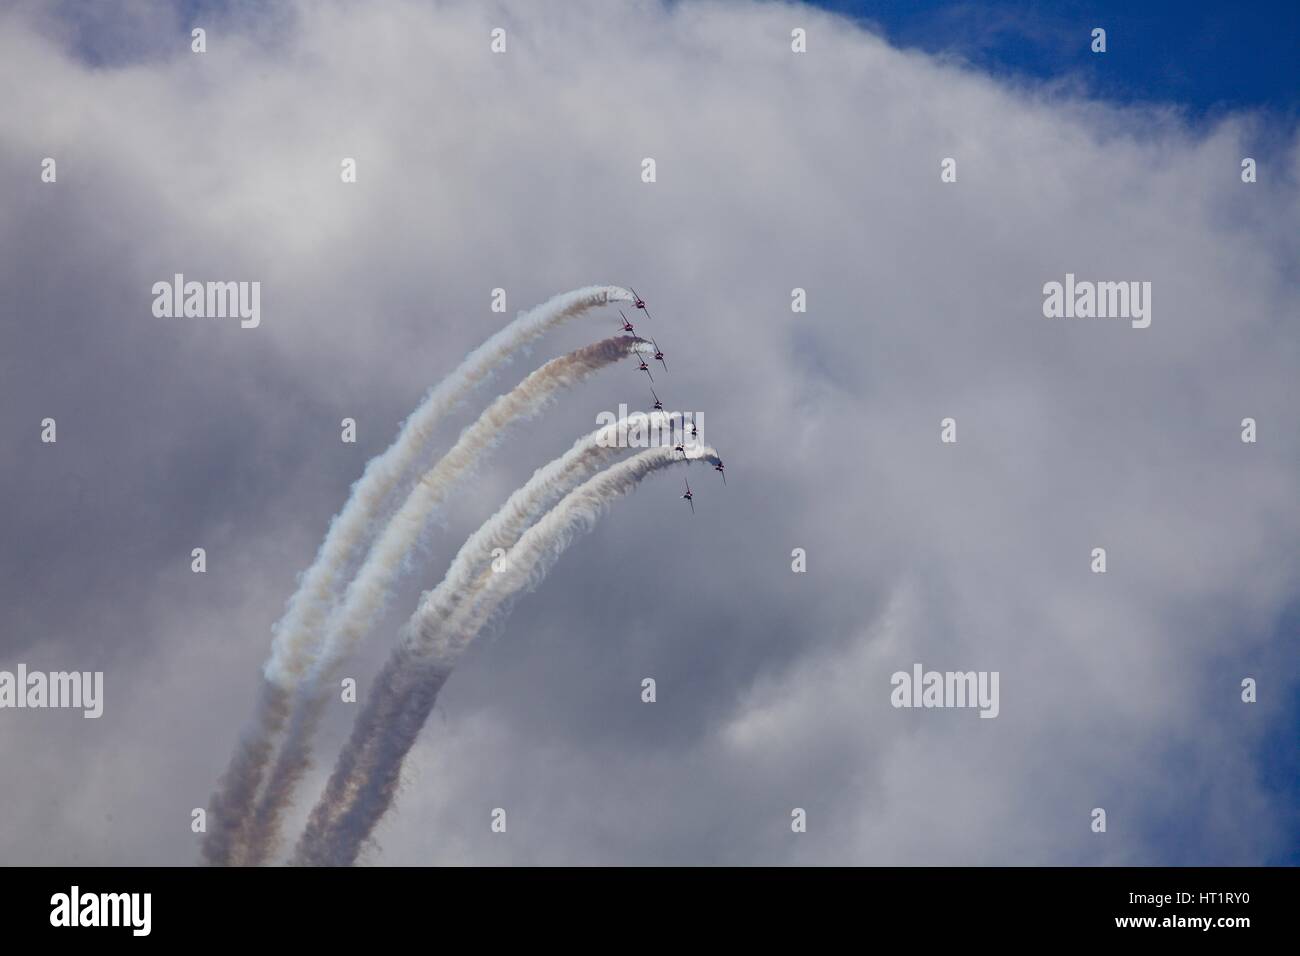 The Red Arrows RAF Royal Air Force Aerobatic Team in flight during a display at Bournemouth Air Festival 2015 Stock Photo